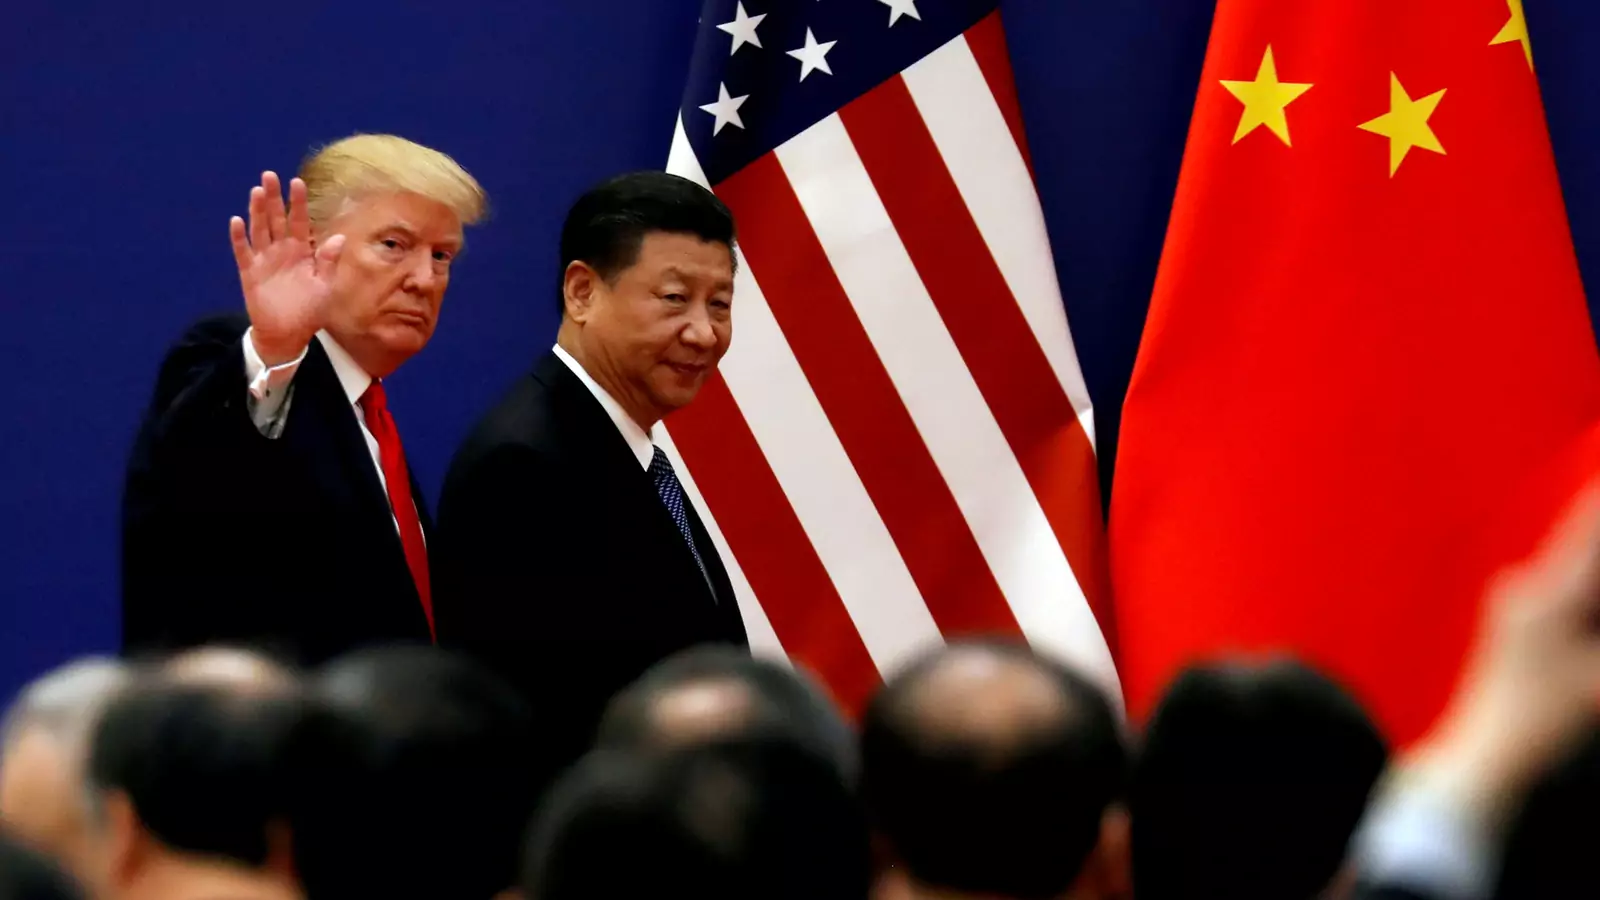 U.S. President Donald J. Trump and China's President Xi Jinping meet business leaders at the Great Hall of the People in Beijing, China, on November 9, 2017.